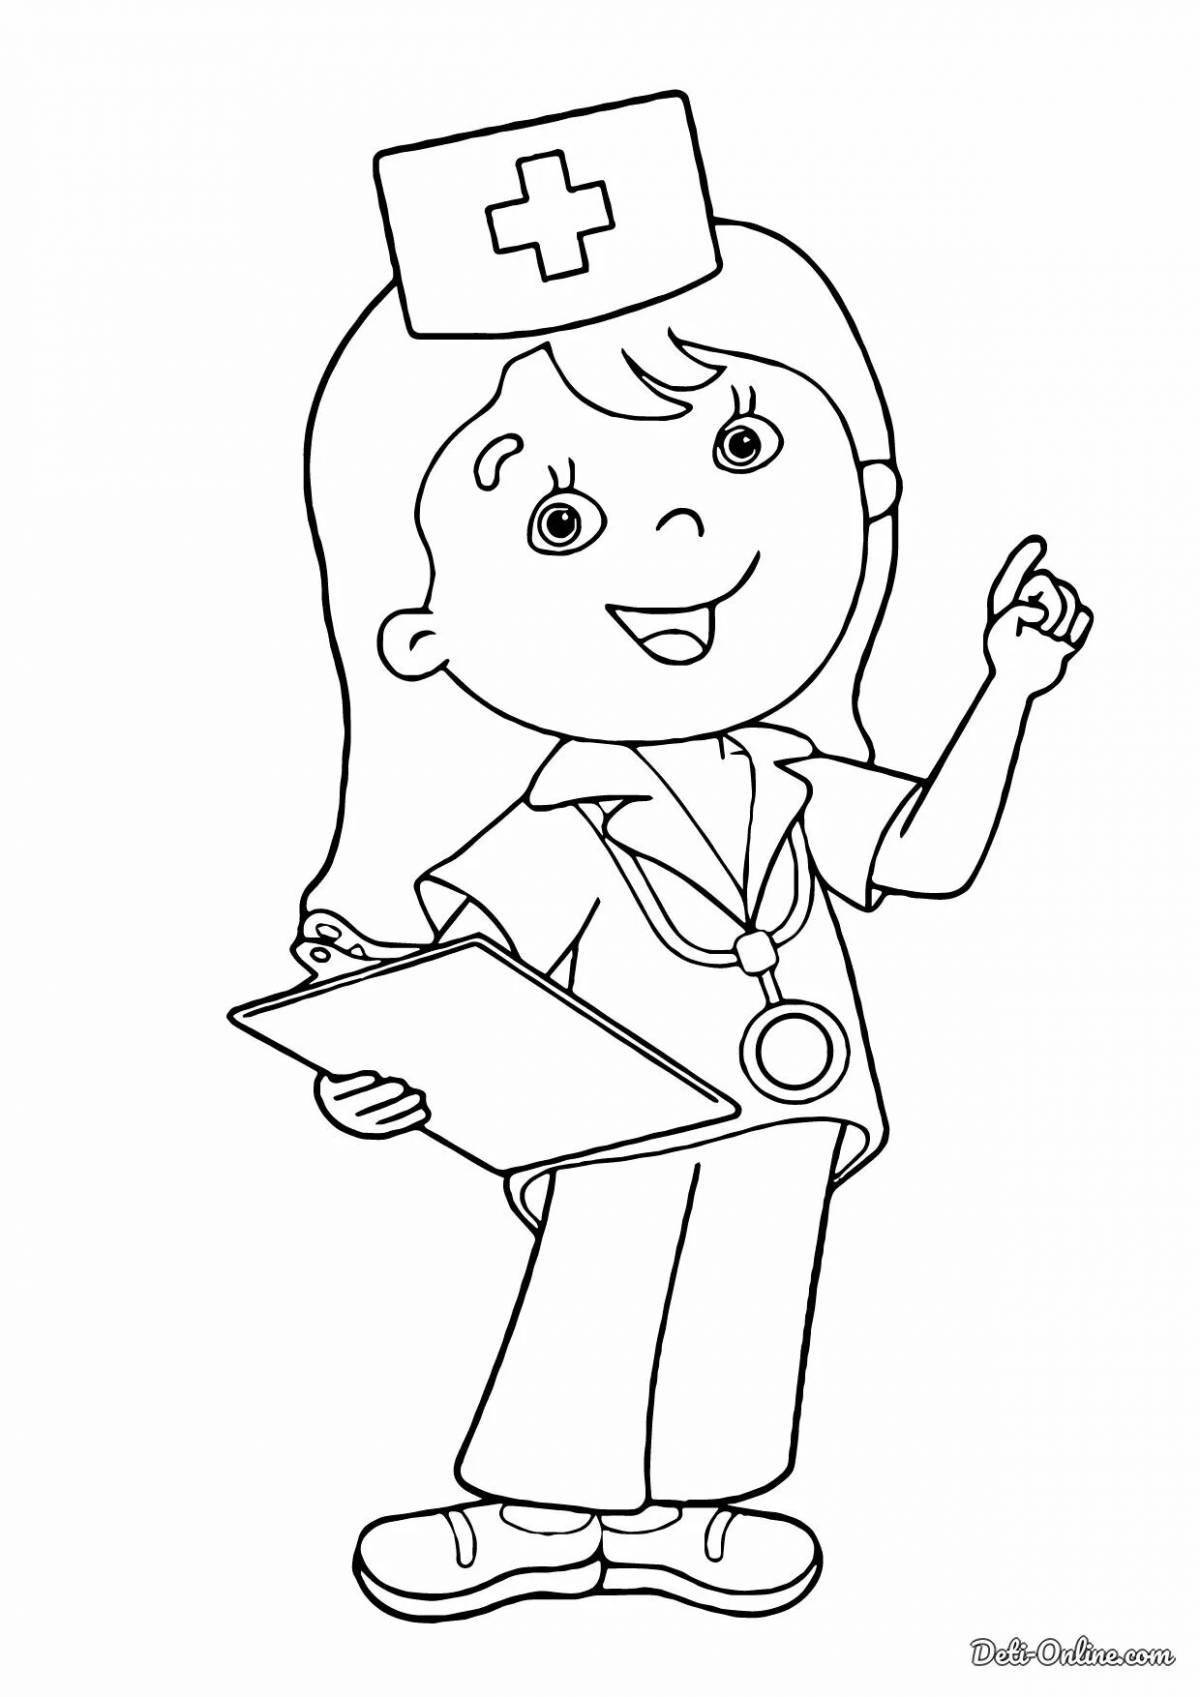 Doctor figure coloring page